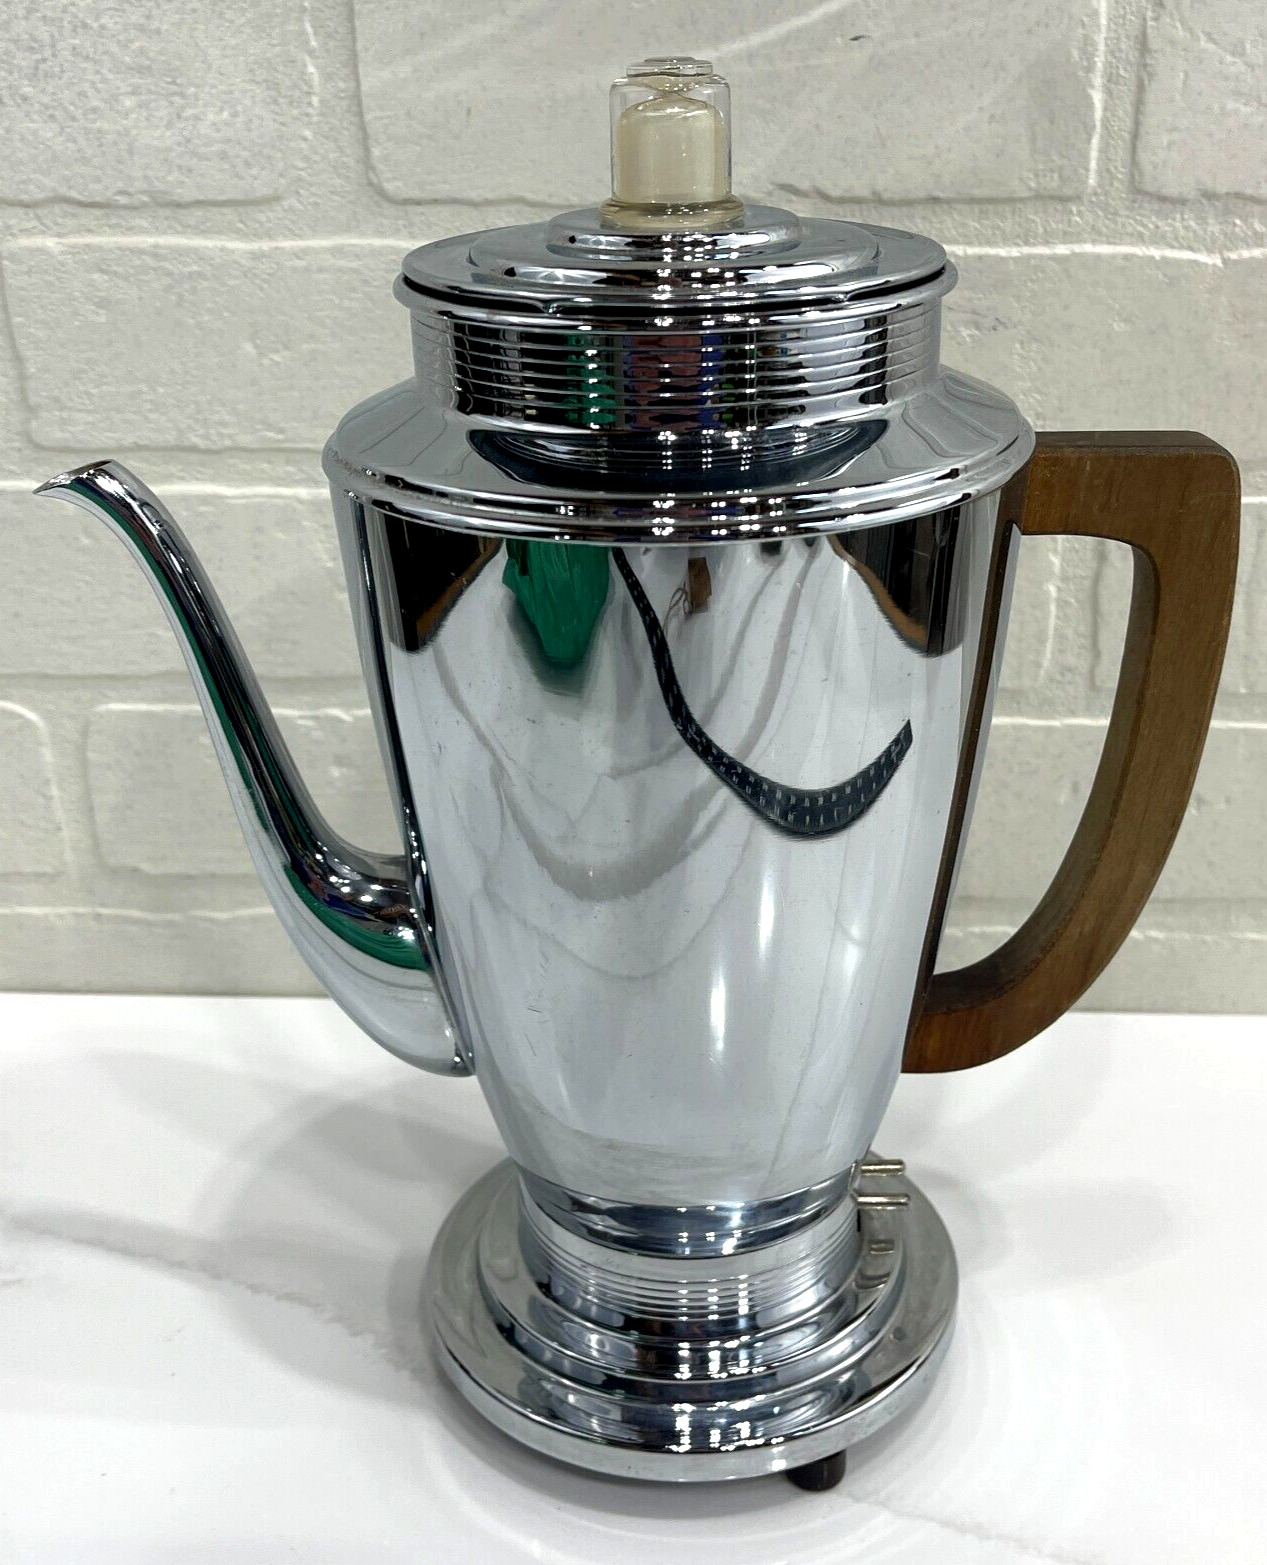 Vintage Coffee Percolator By Manning-Bowman BEST COFFEE EVER Excellent Condition